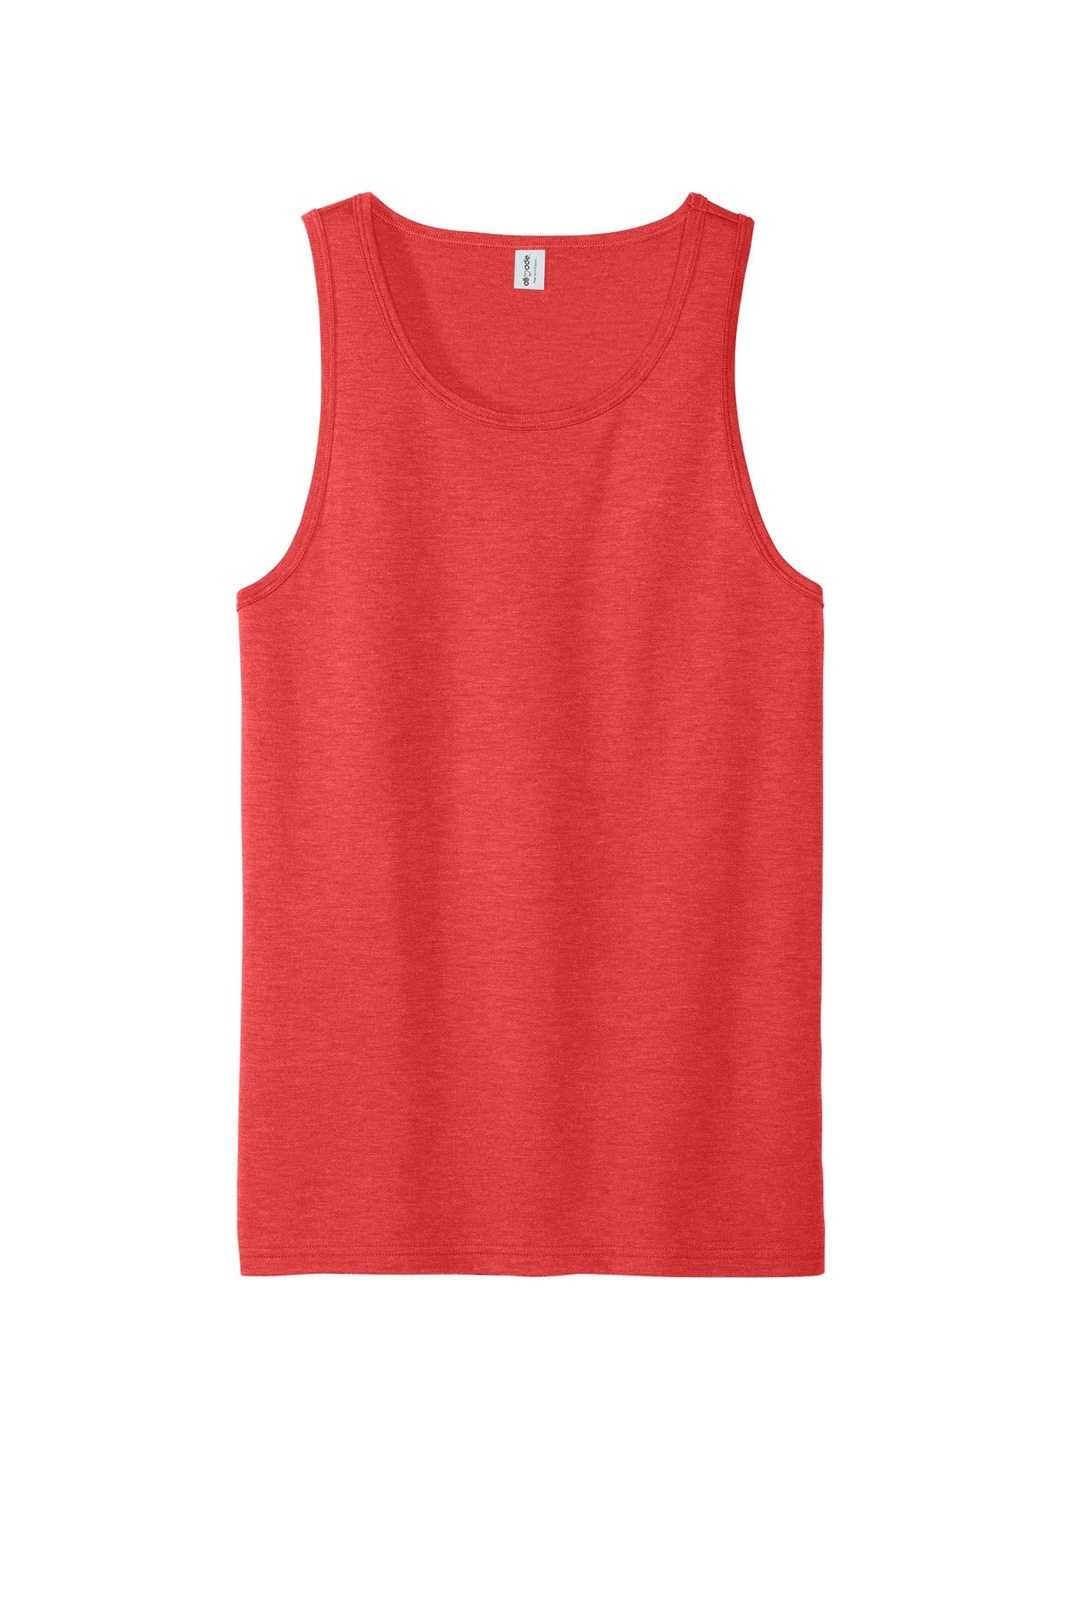 AllMade AL2019 Unisex Tri-Blend Tank - Rise Up Red - HIT a Double - 1